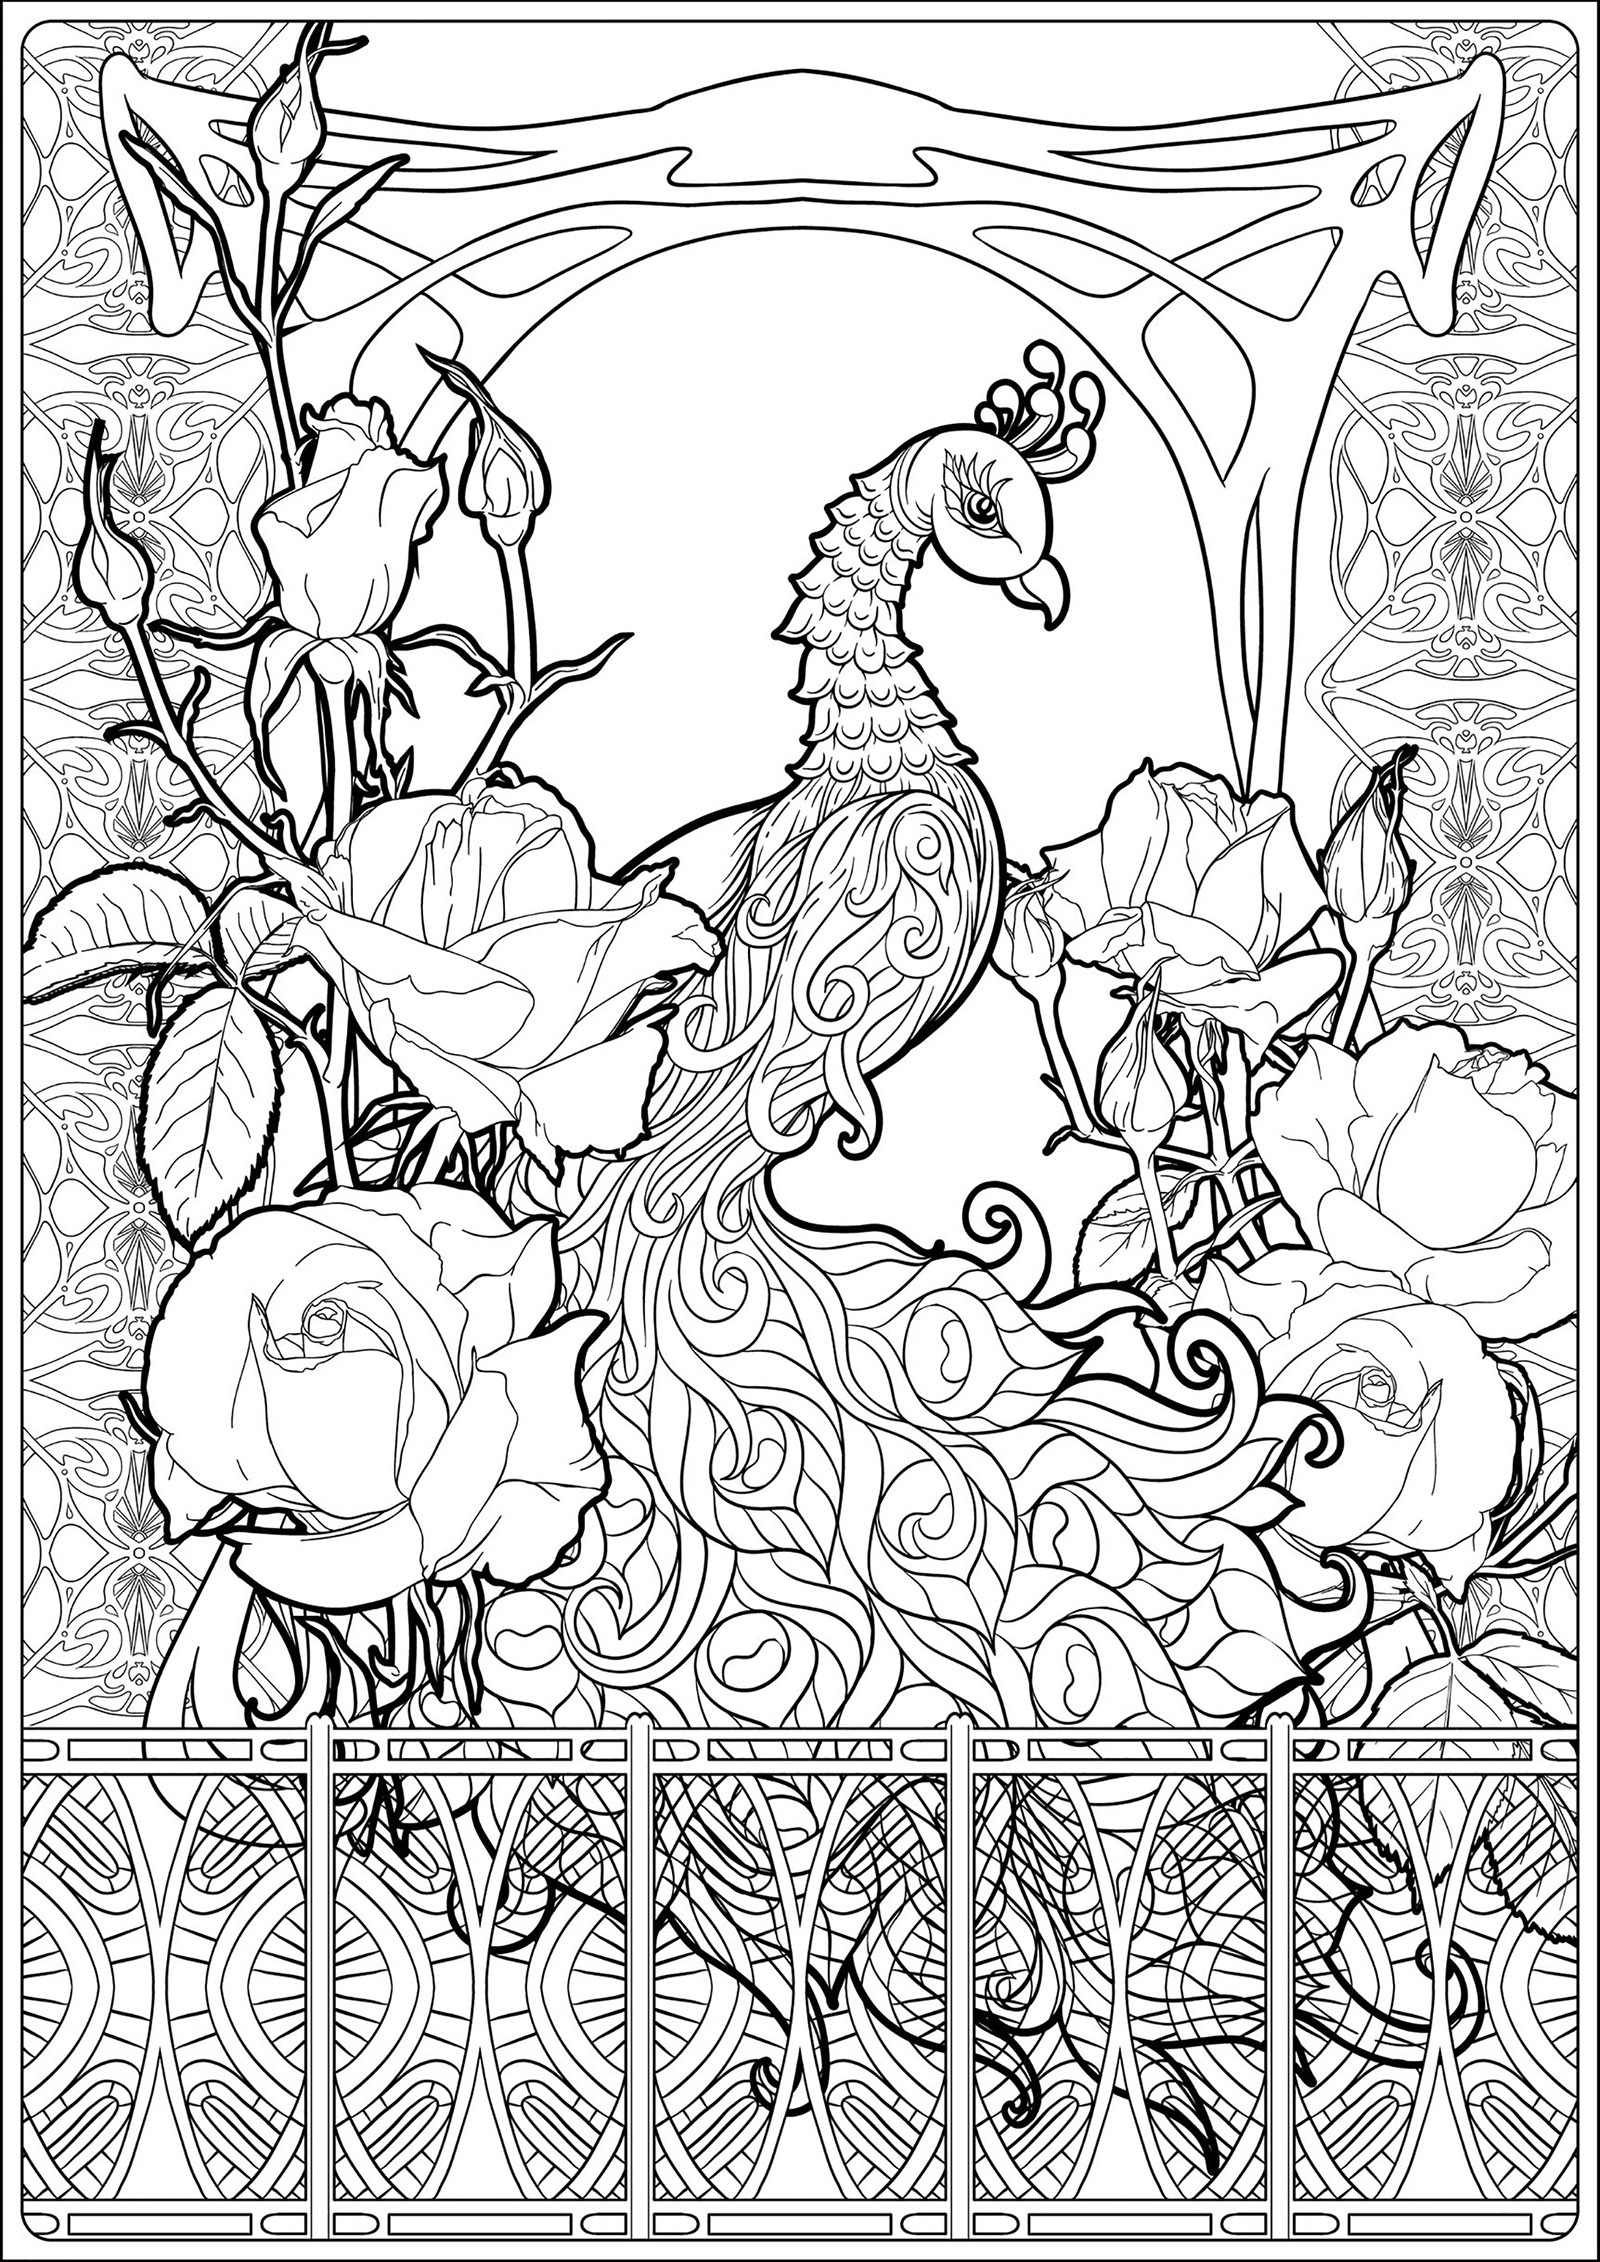 Coloring page of a peacock, with many graphic elements related to Art Nouveau and pretty roses, Source : 123rf   Artist : Helenlane